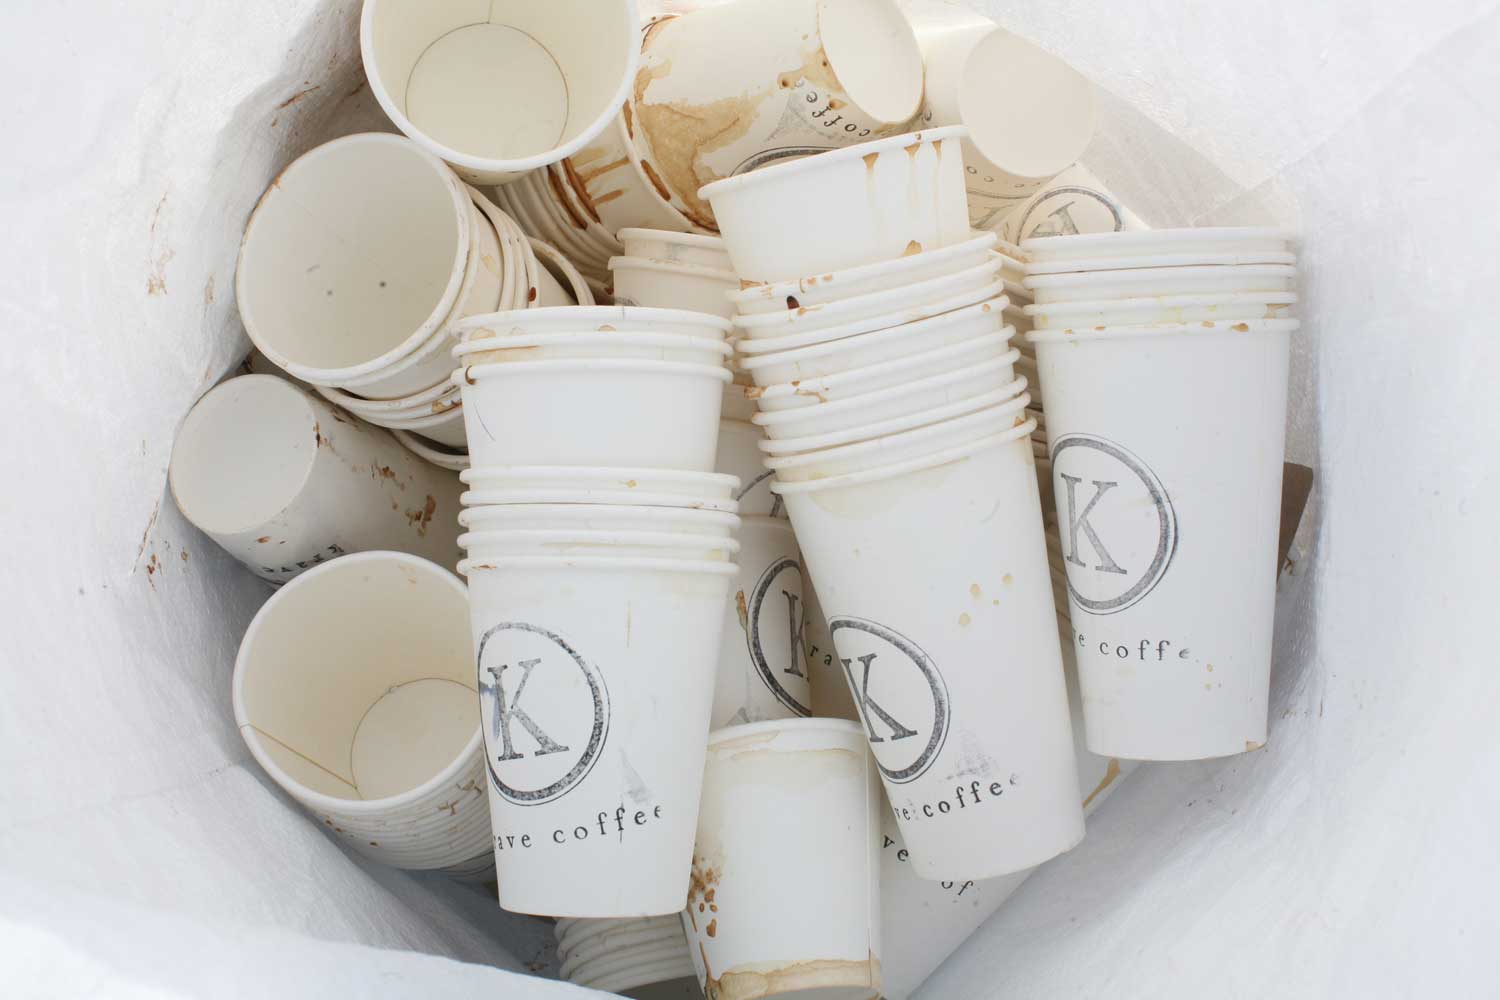 krave coffee cups recycling